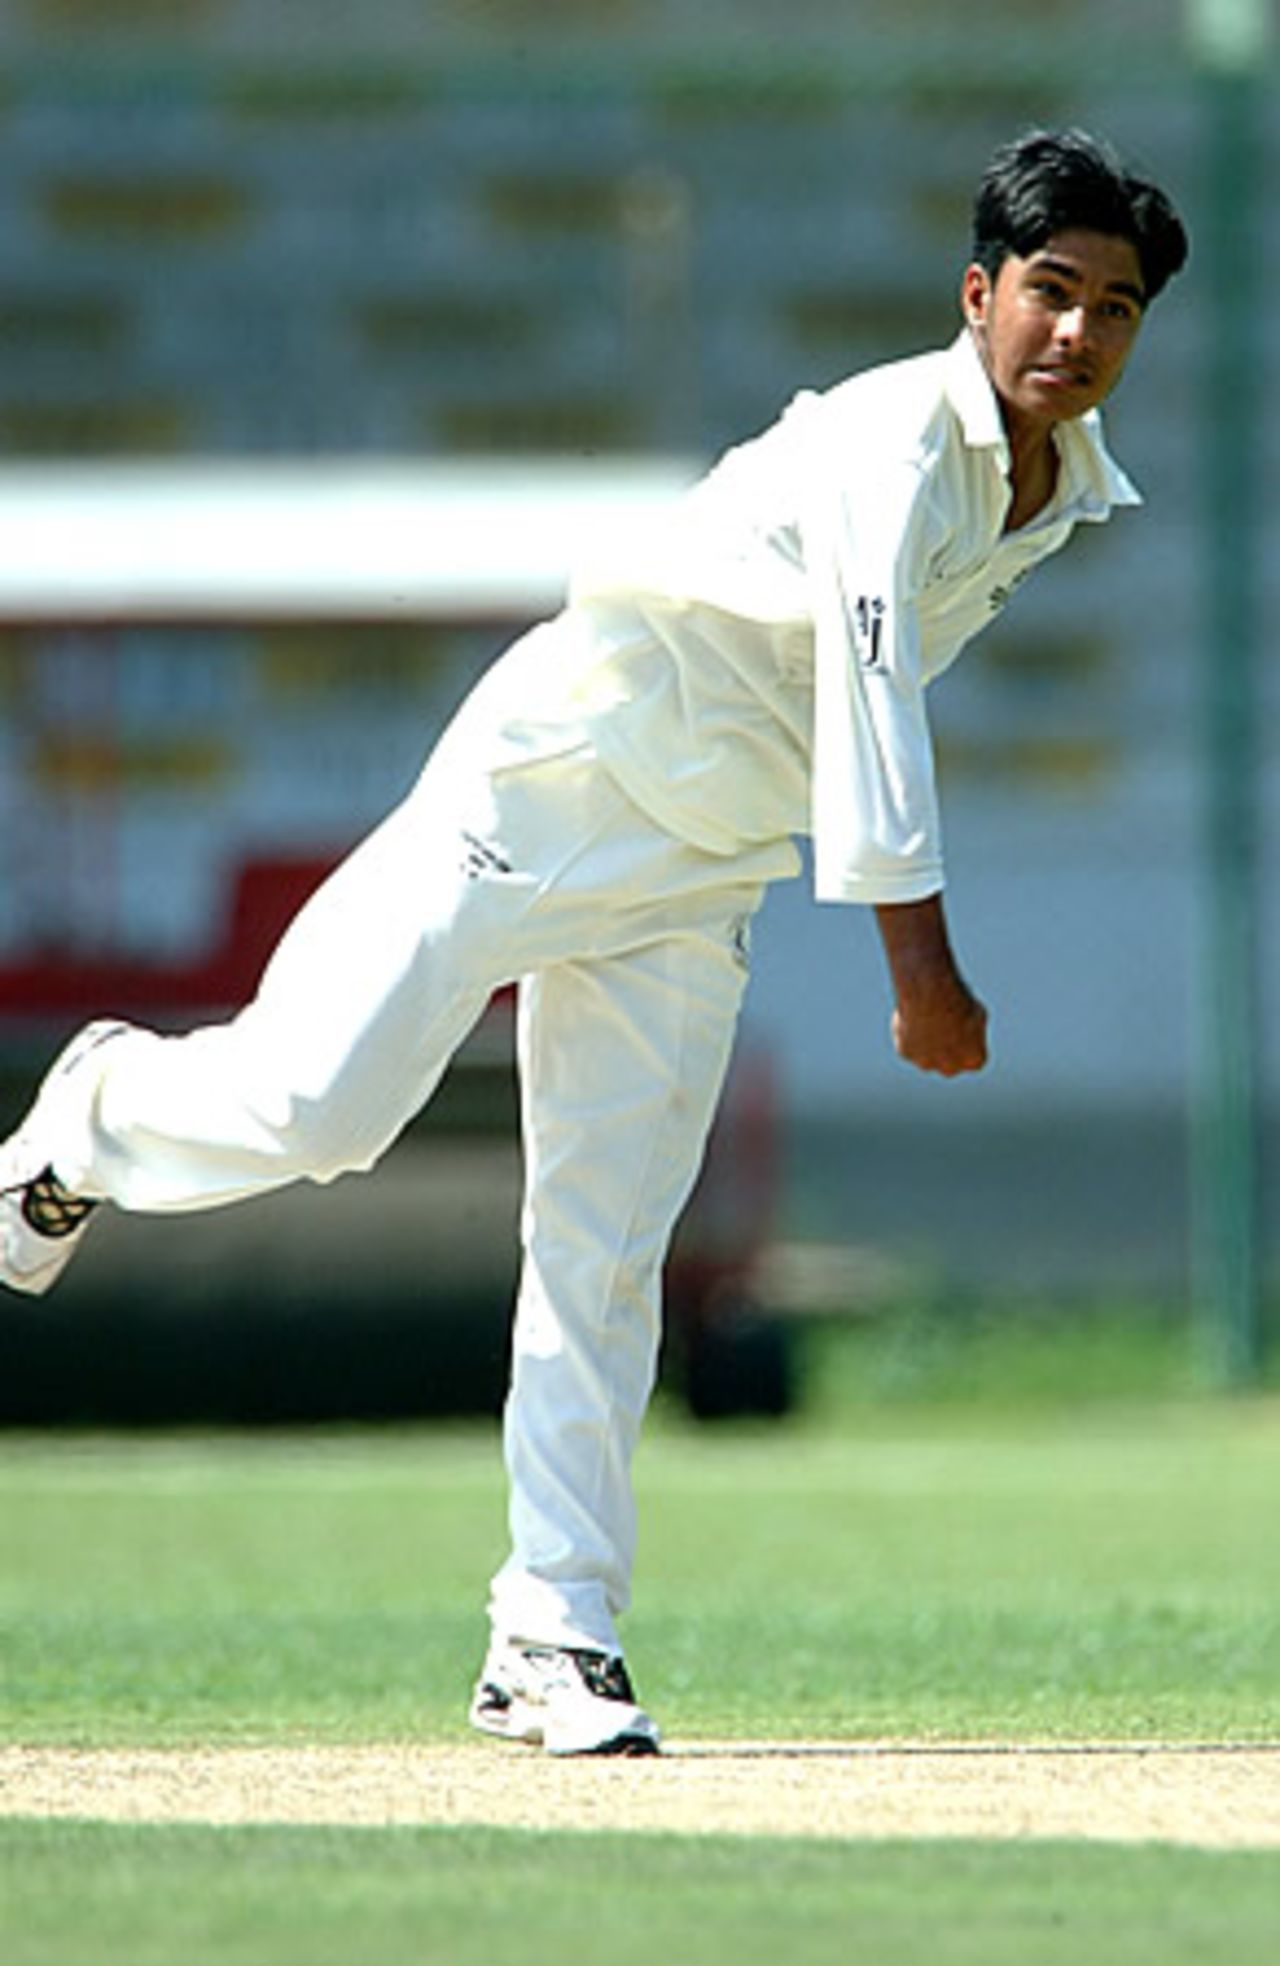 Ansar Raza, Oman in action during his haul of 4 for 9 runs, Oman Under-19s v Thailand Under-19s at National Stadium Karachi, Youth Asia Cup 2003, 19 July 2003.